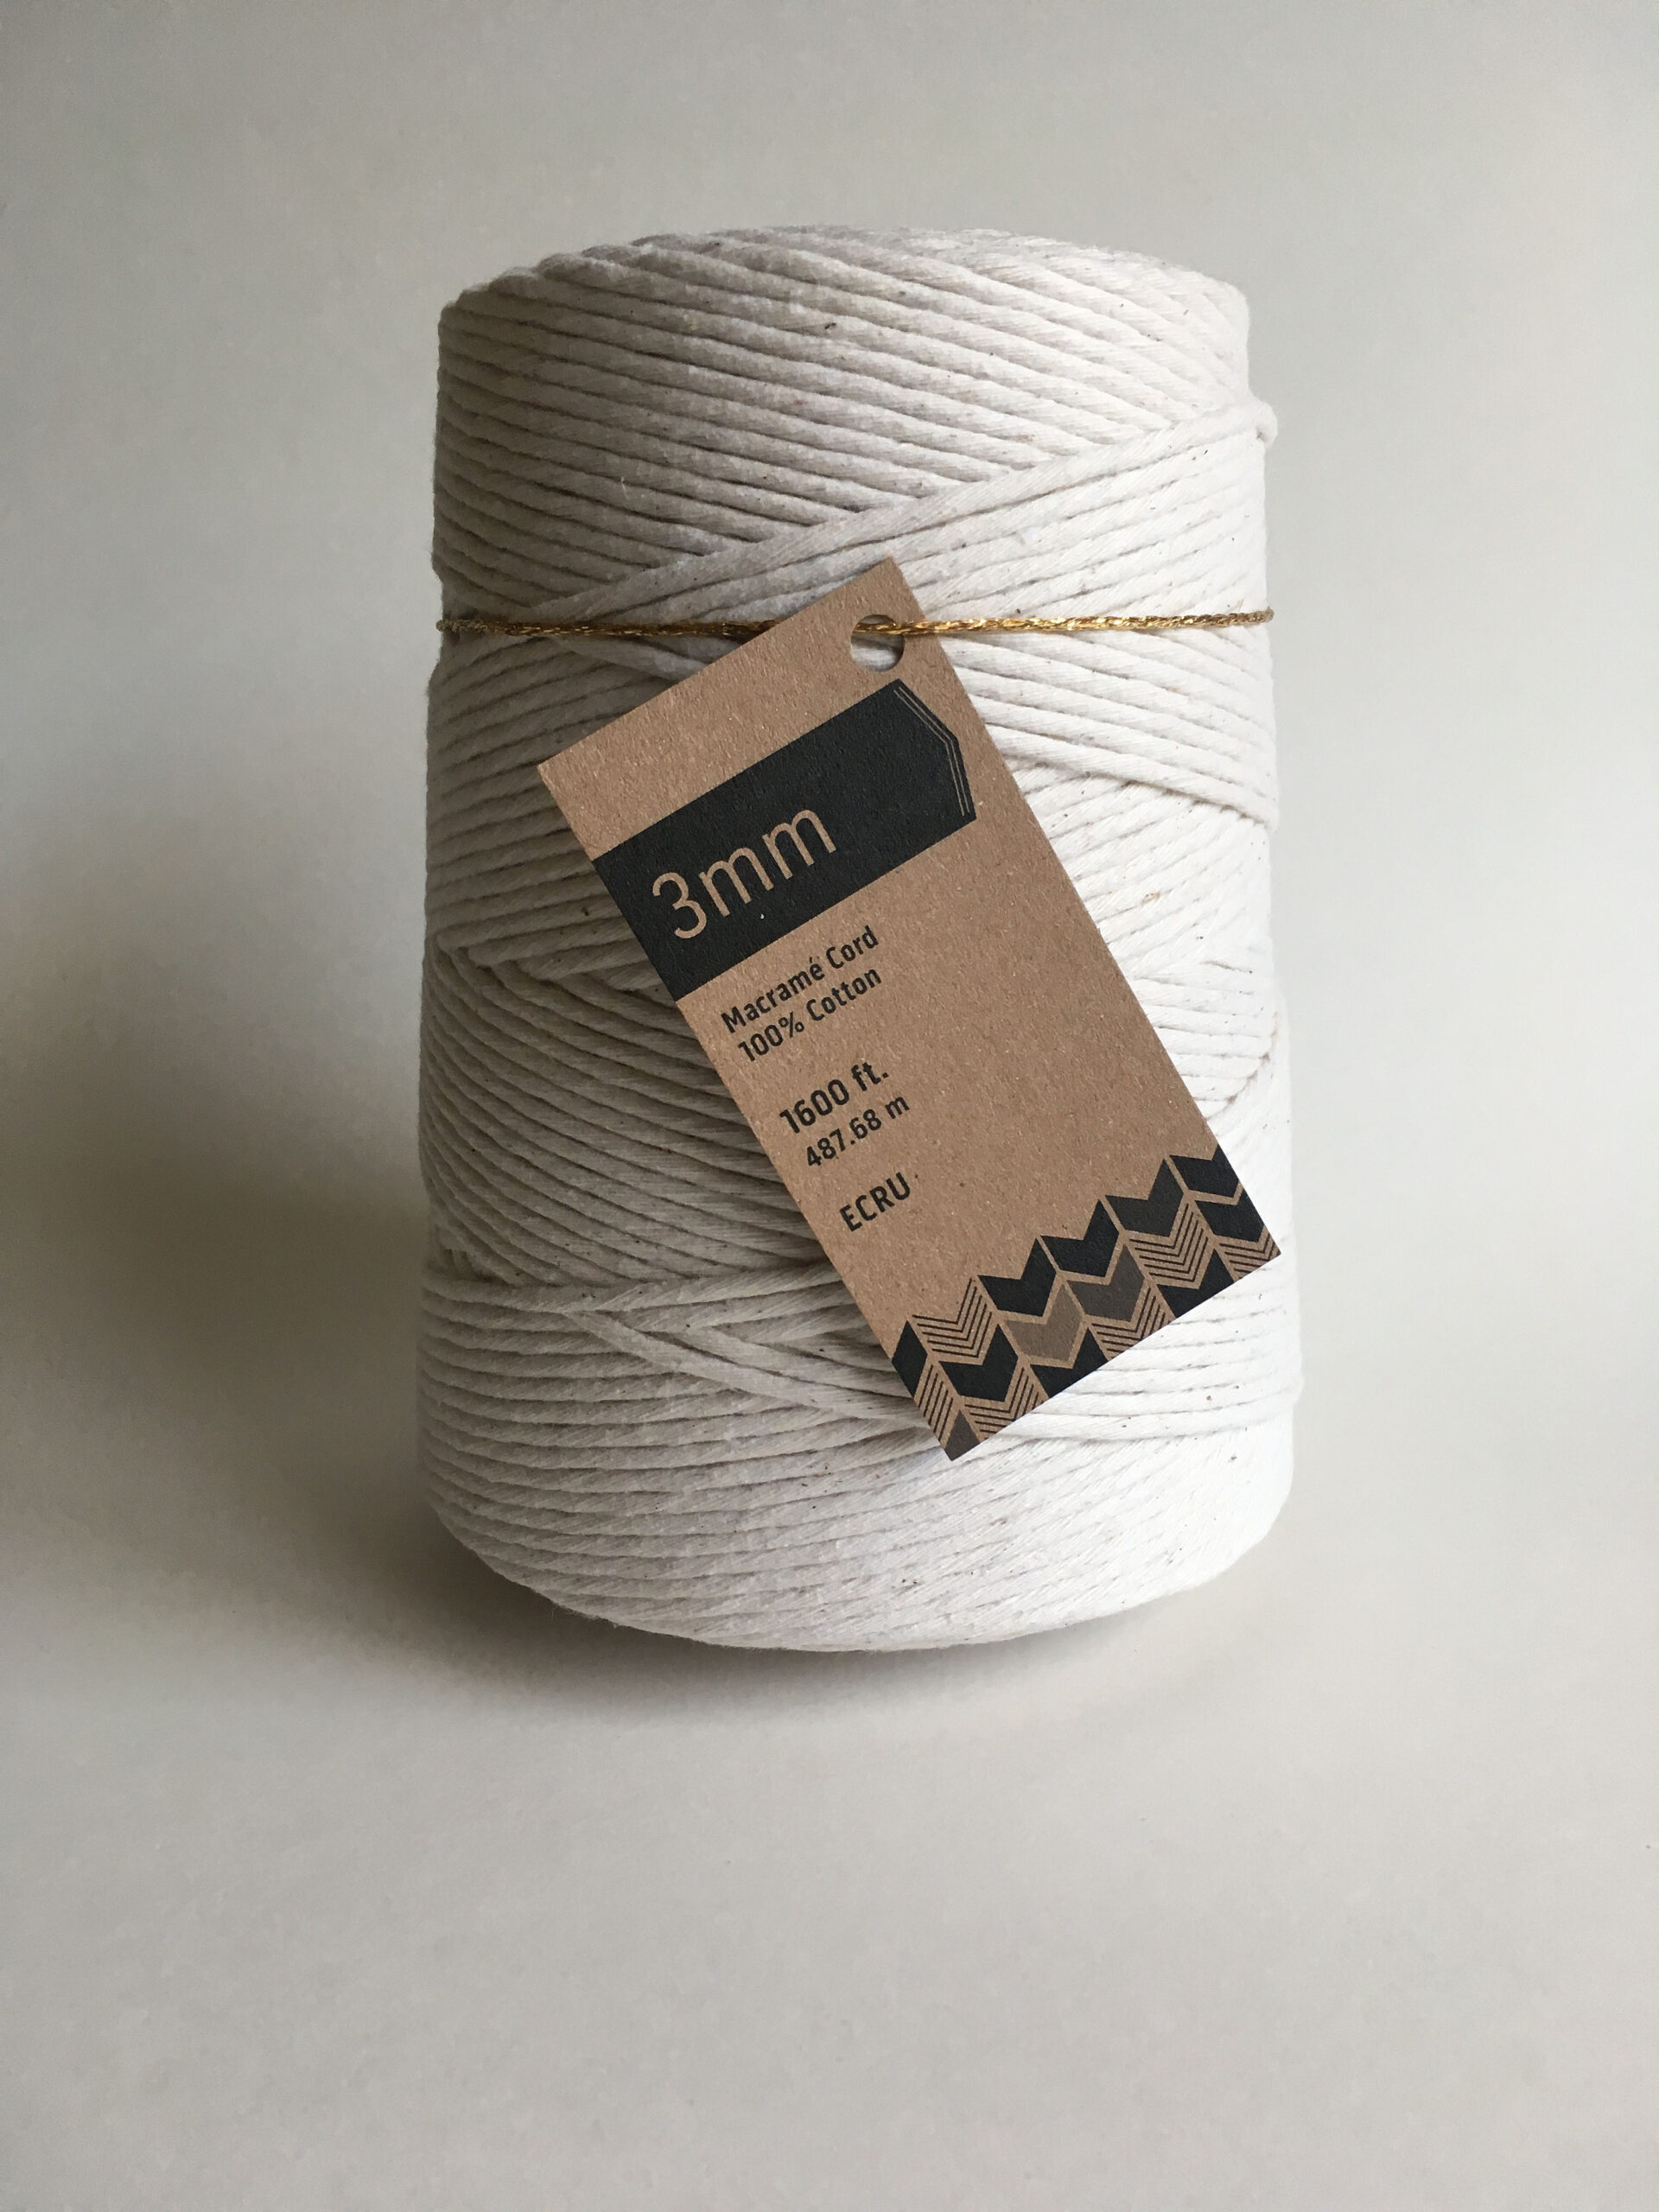 Natural Cotton String for Crafting and Making Bracelets and Necklaces